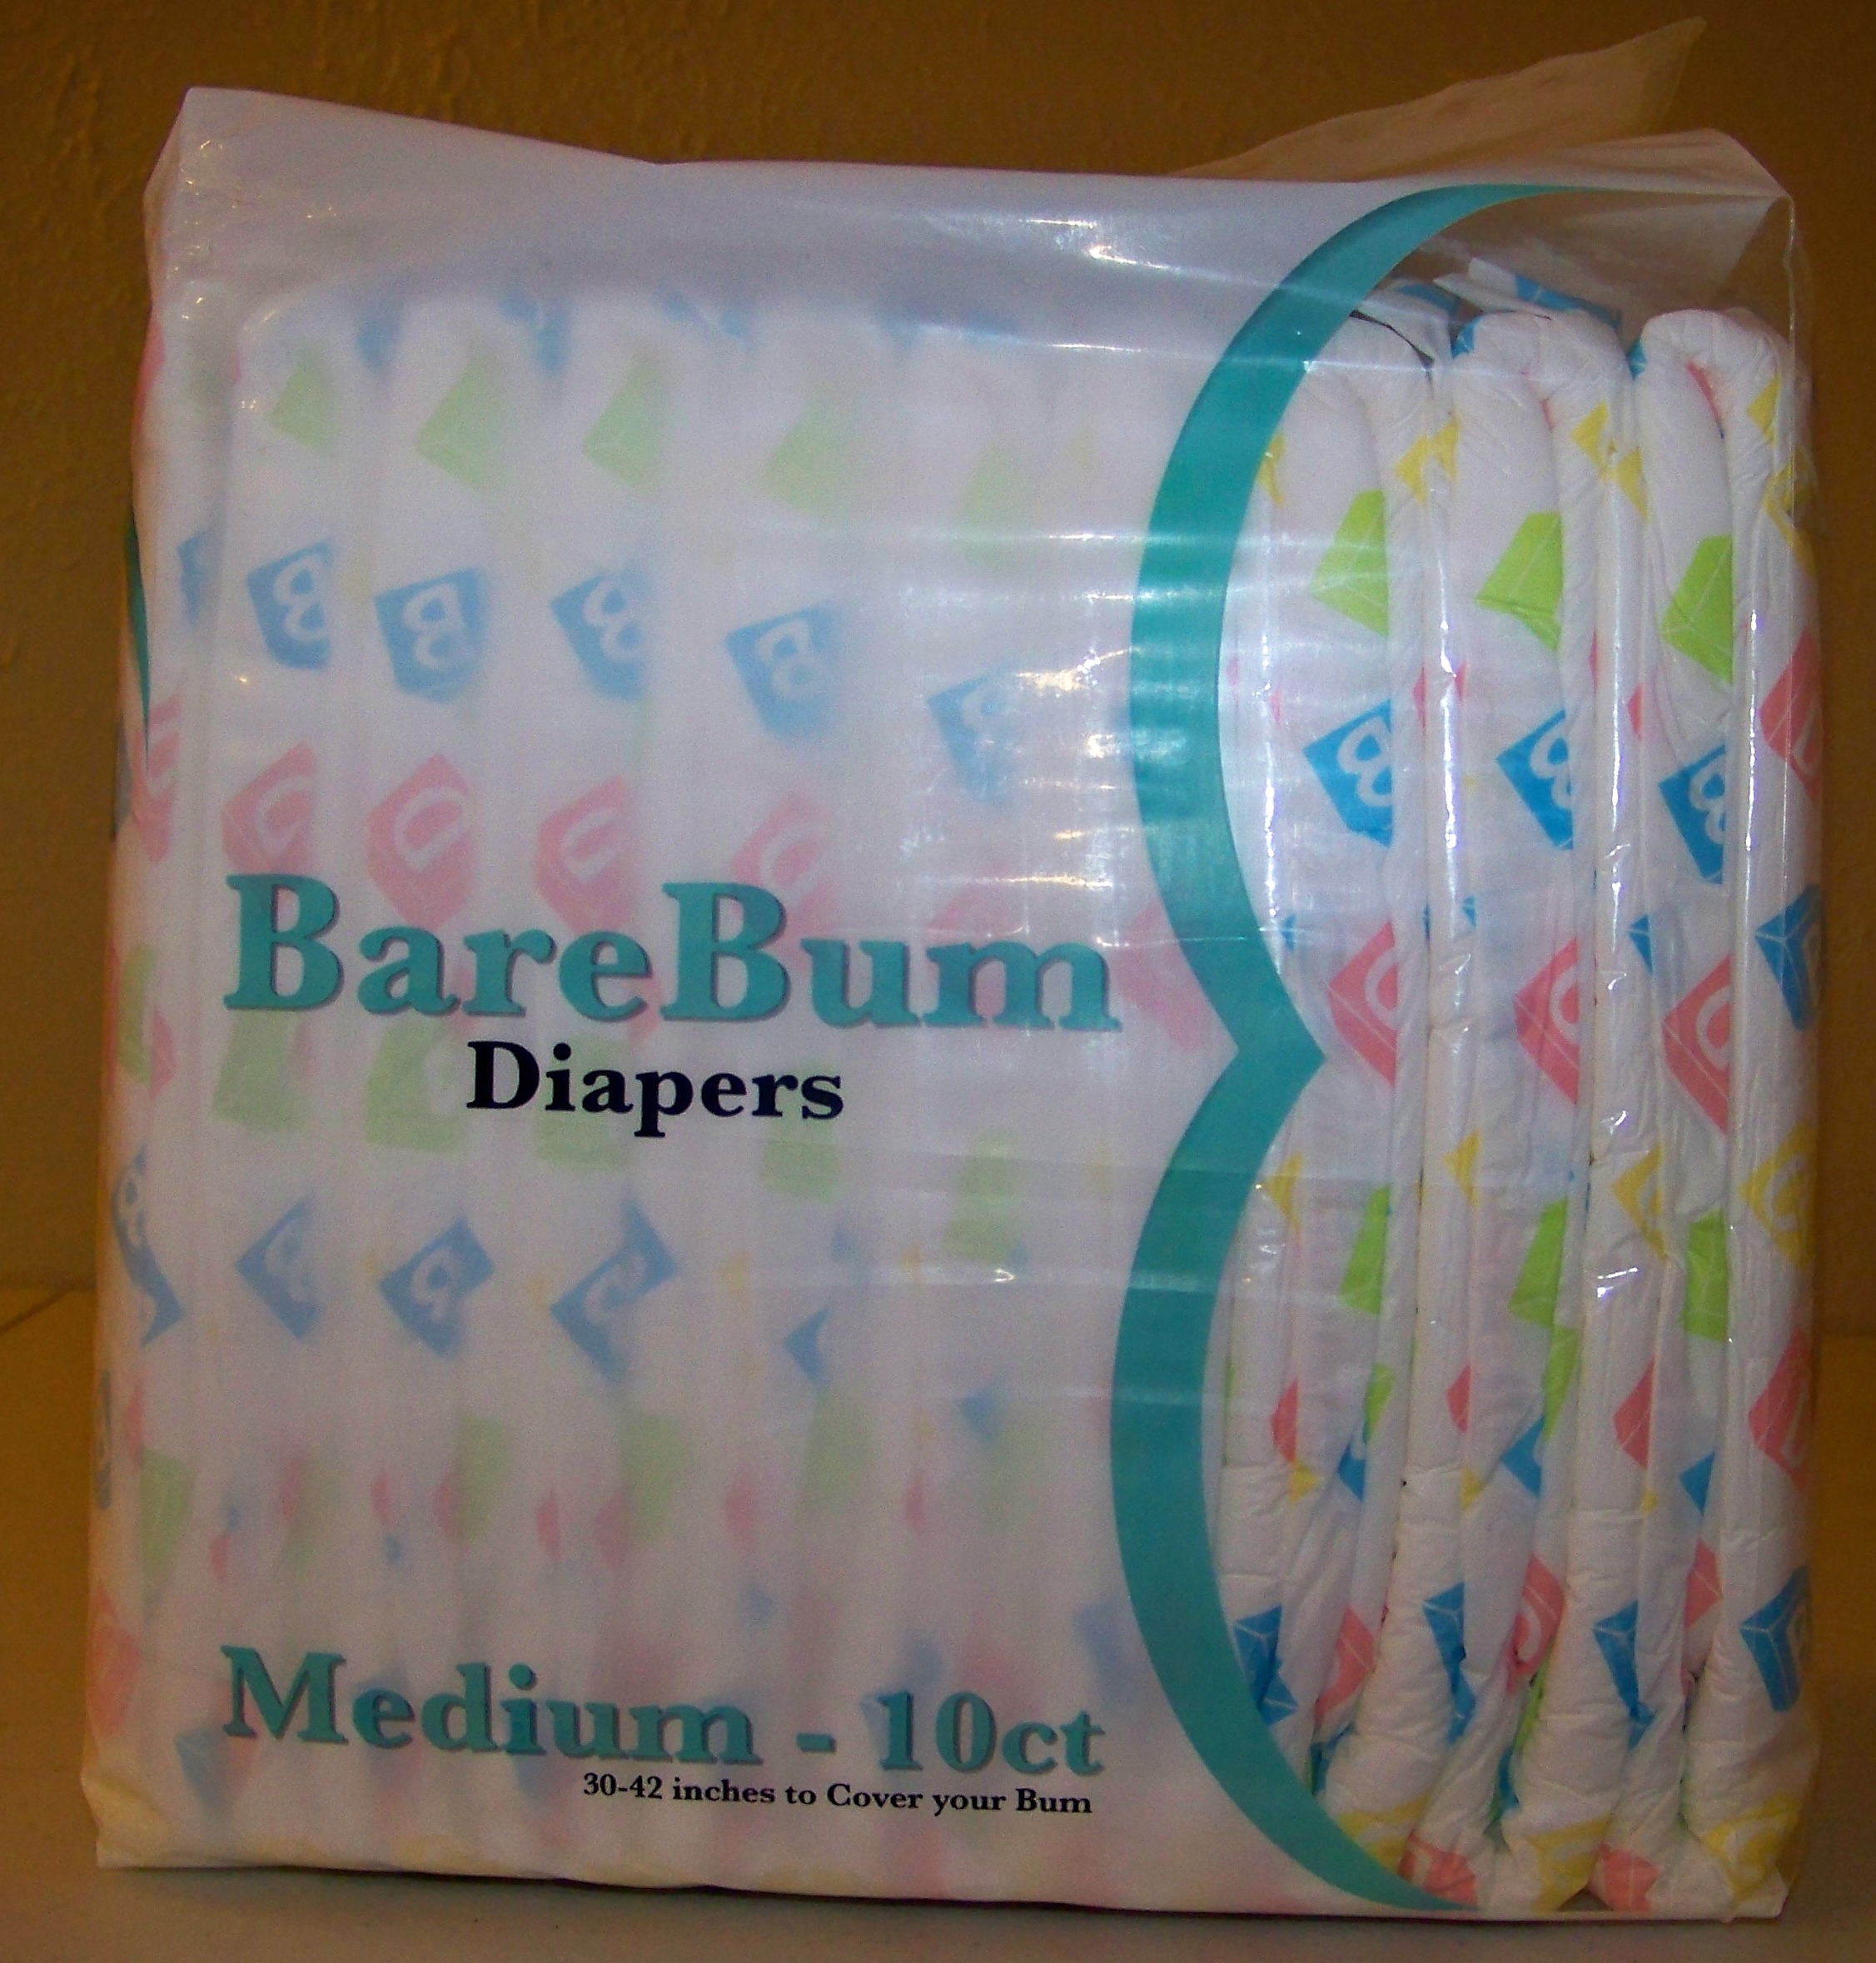 BareBum Diaper Review | ADISC.org - The AB/DL/IC Support Community